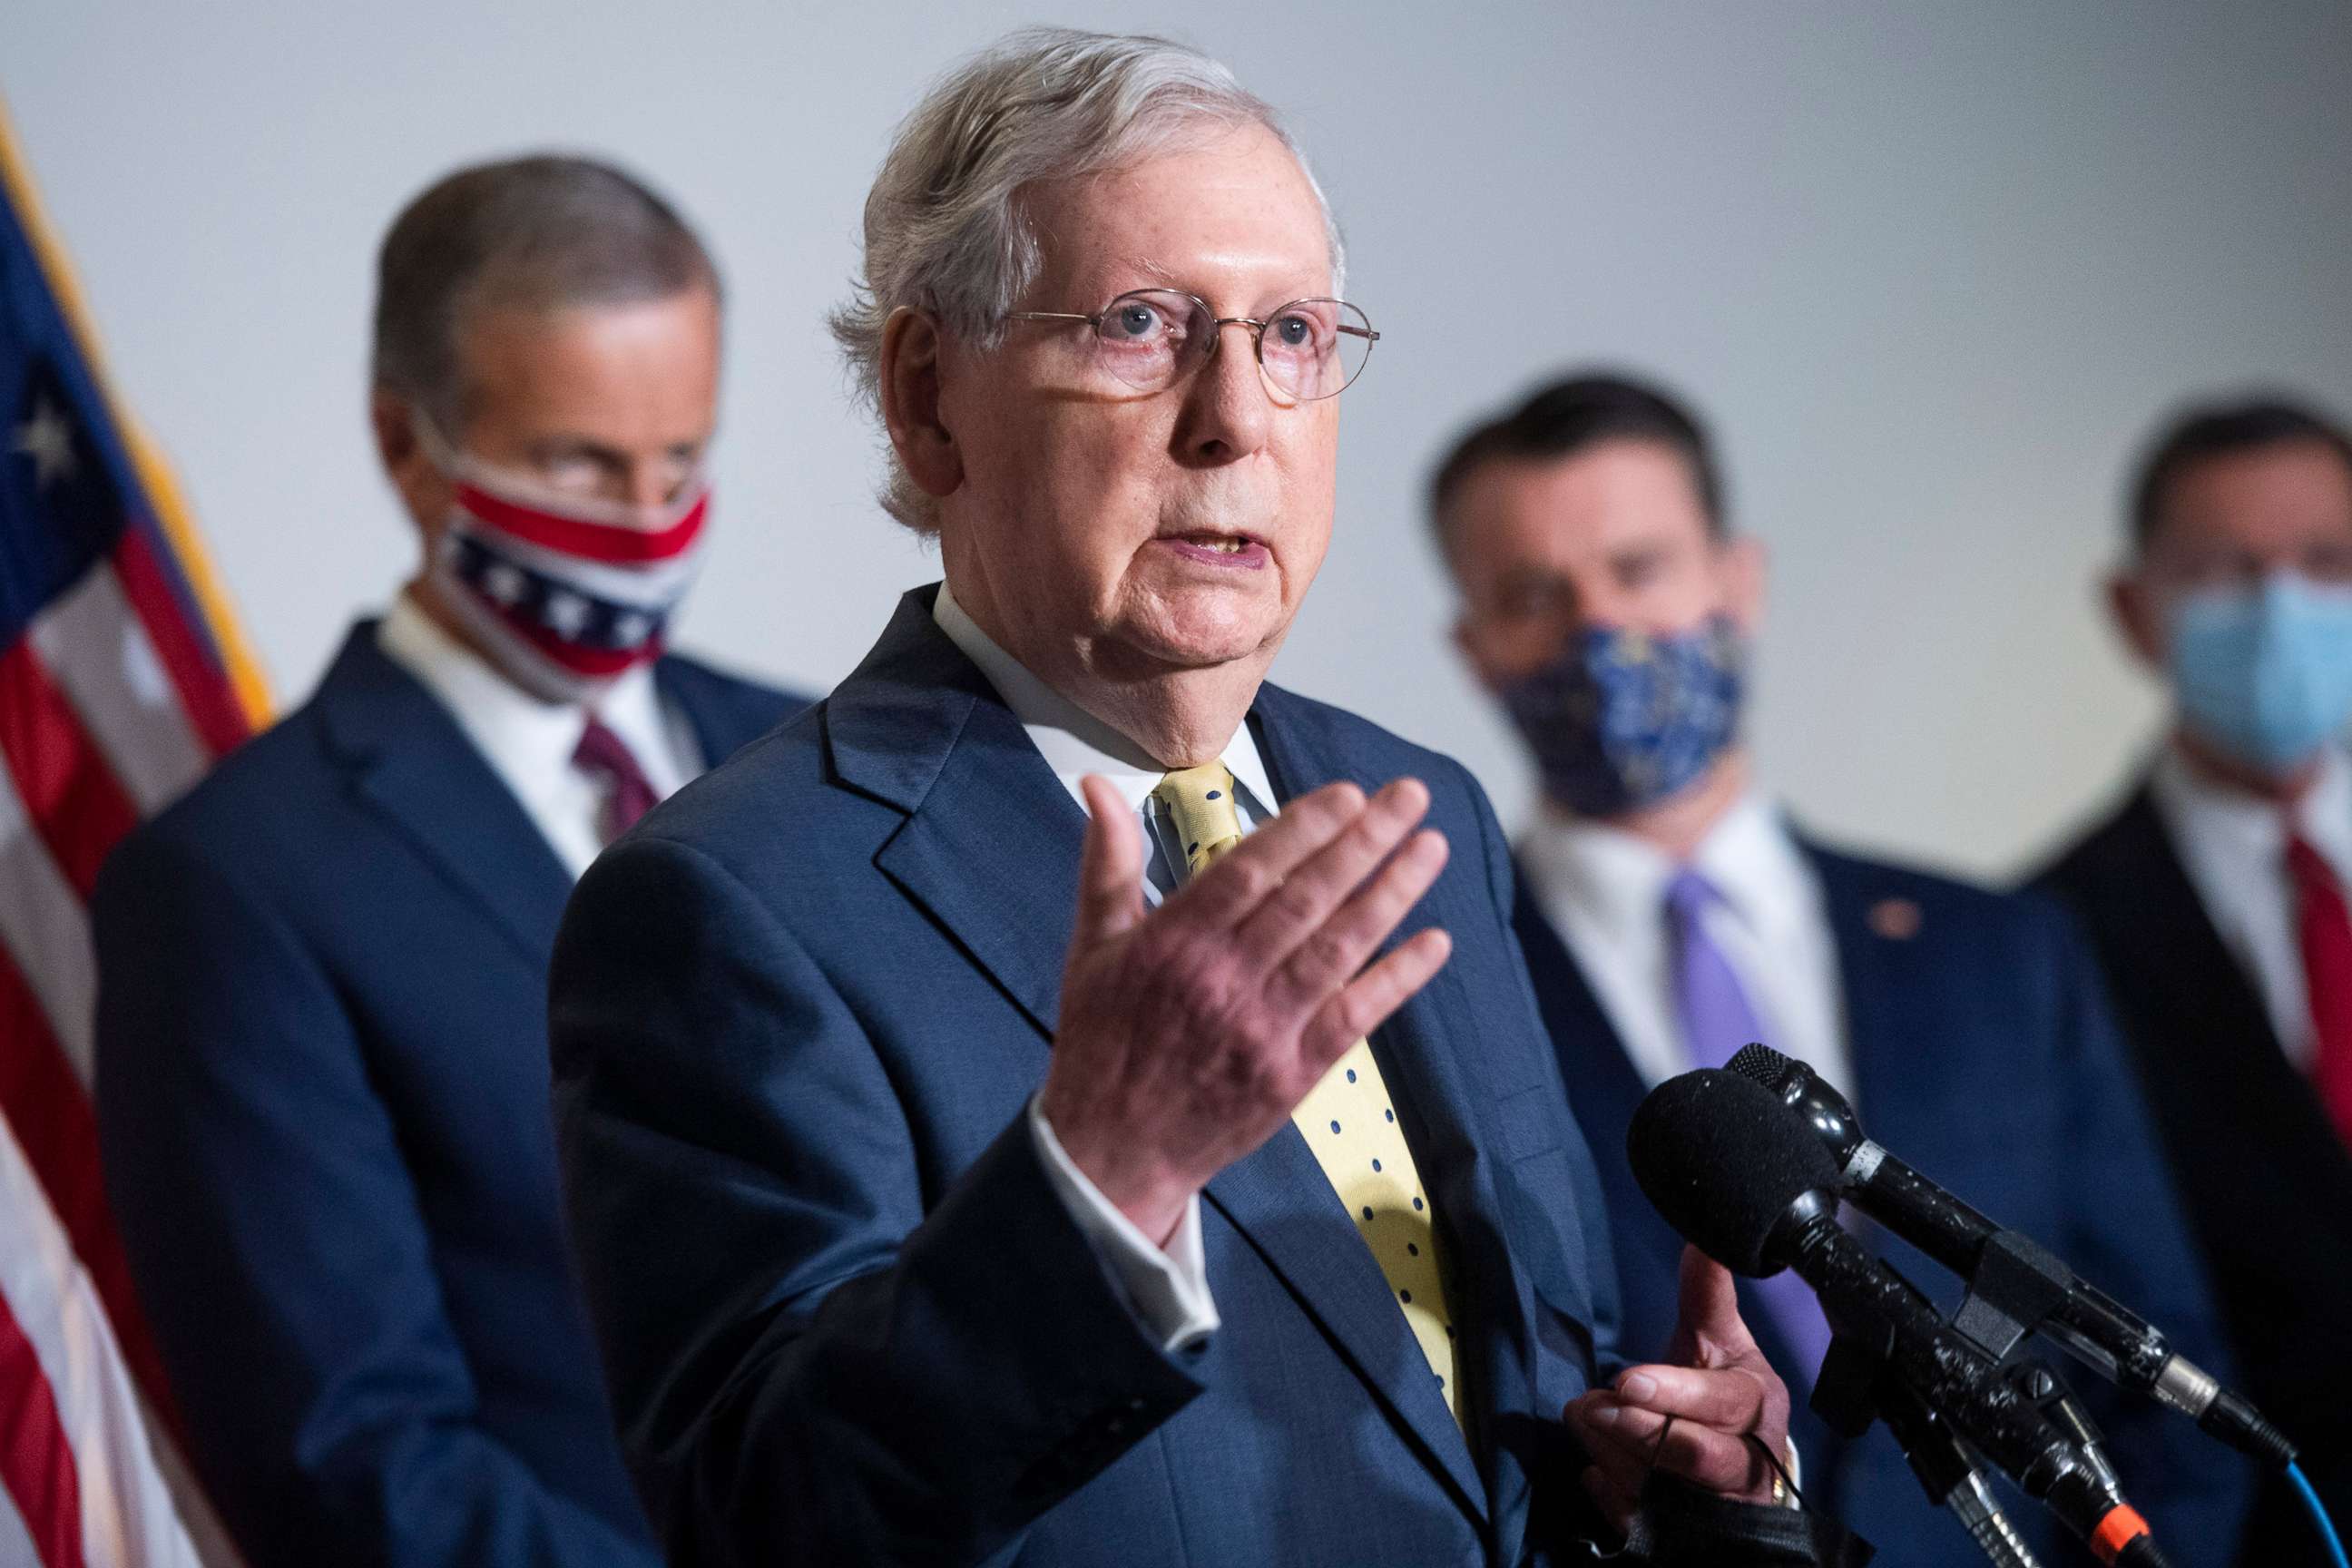 PHOTO: Senate Majority Leader Mitch McConnell conducts a news conference in Washington, September 9, 2020.  